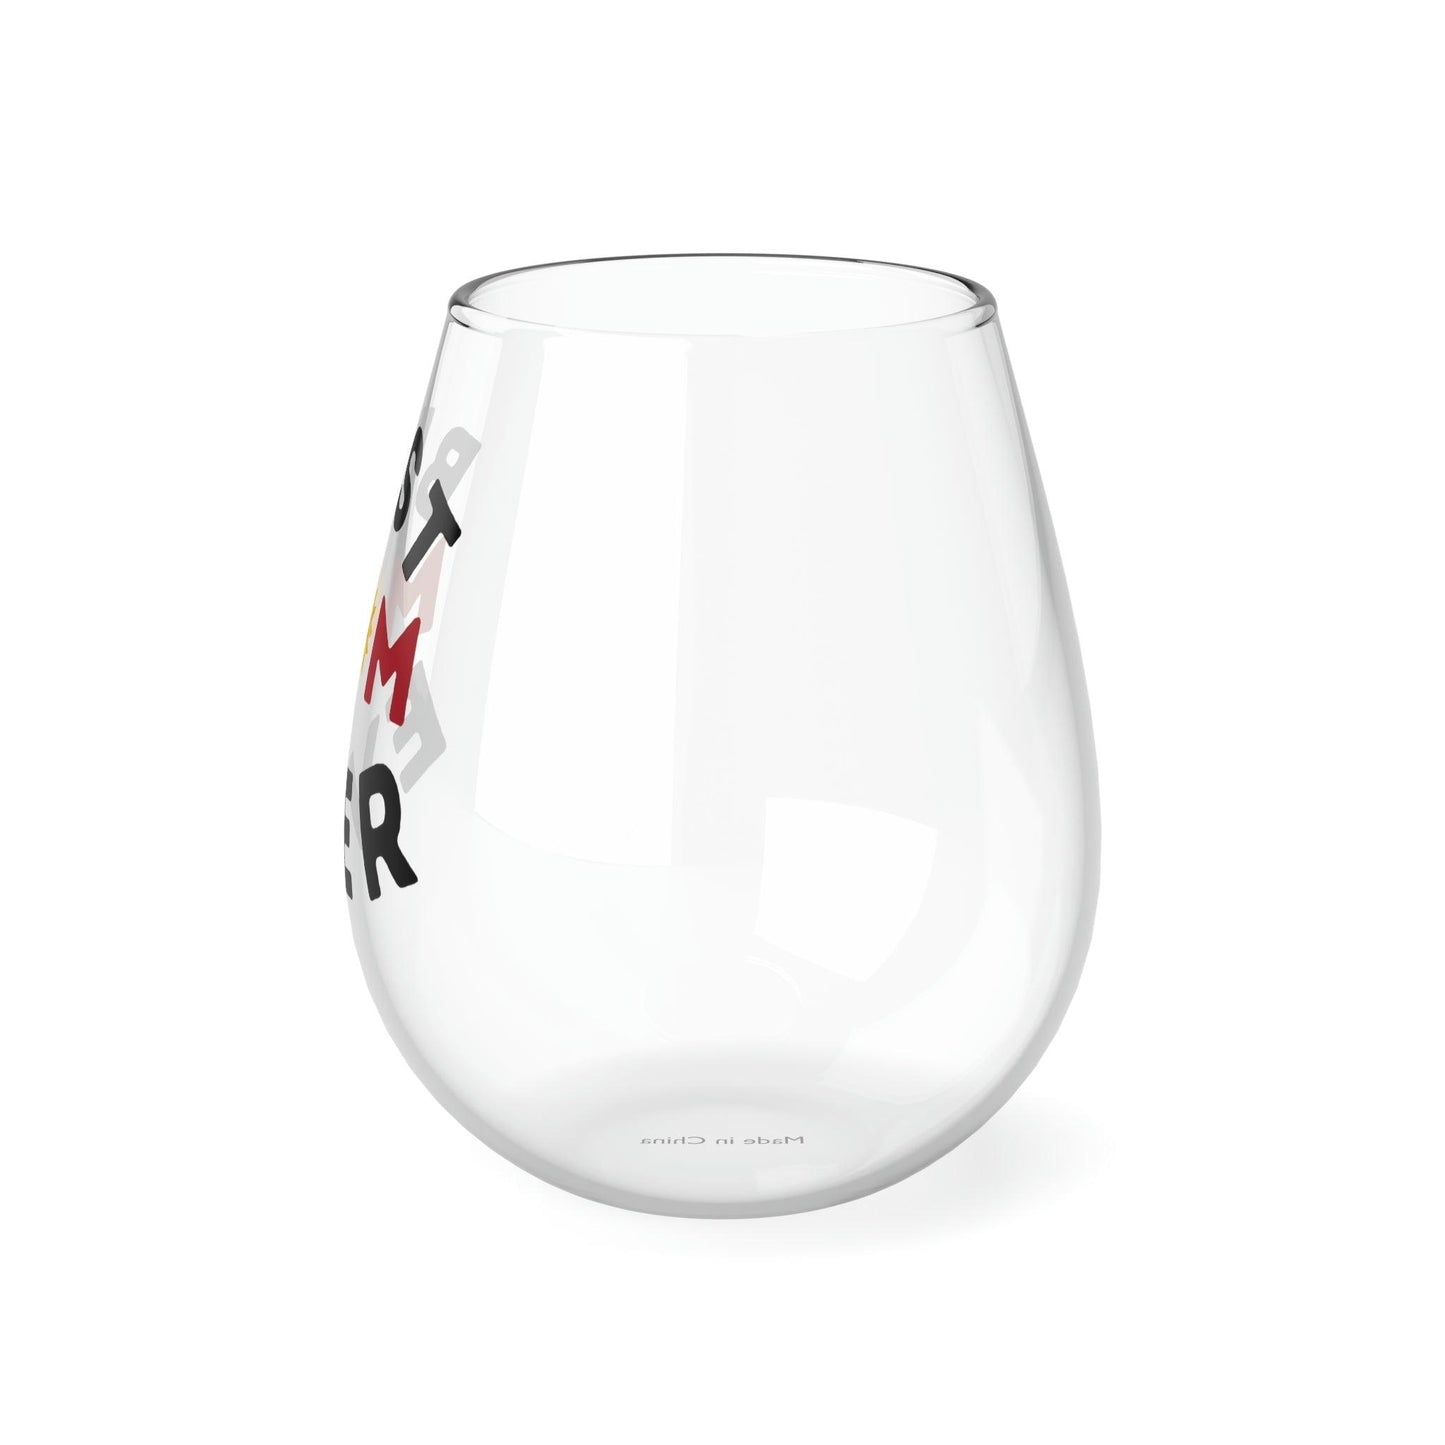 Mom wine glass Best Mom Ever Wine Glass - Mother's Day Wine glass Gift for Mom